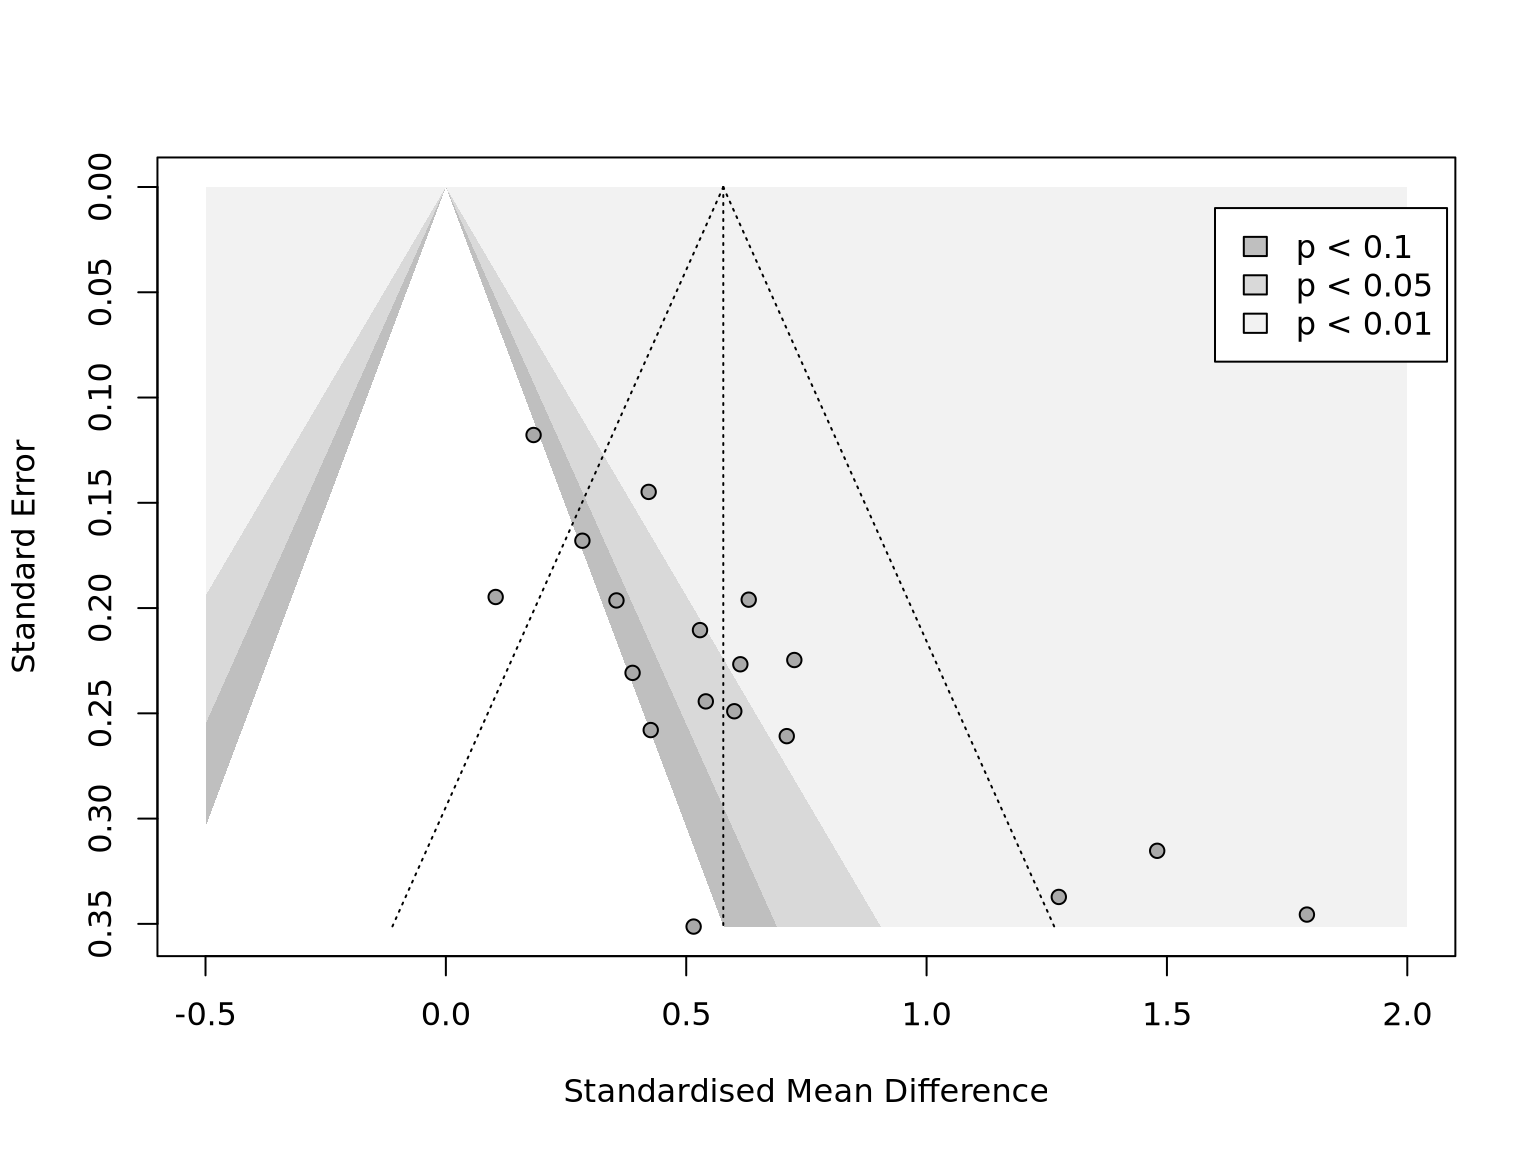 Contour-Enhanced Funnel Plot (adapted from @harrer2021doing).